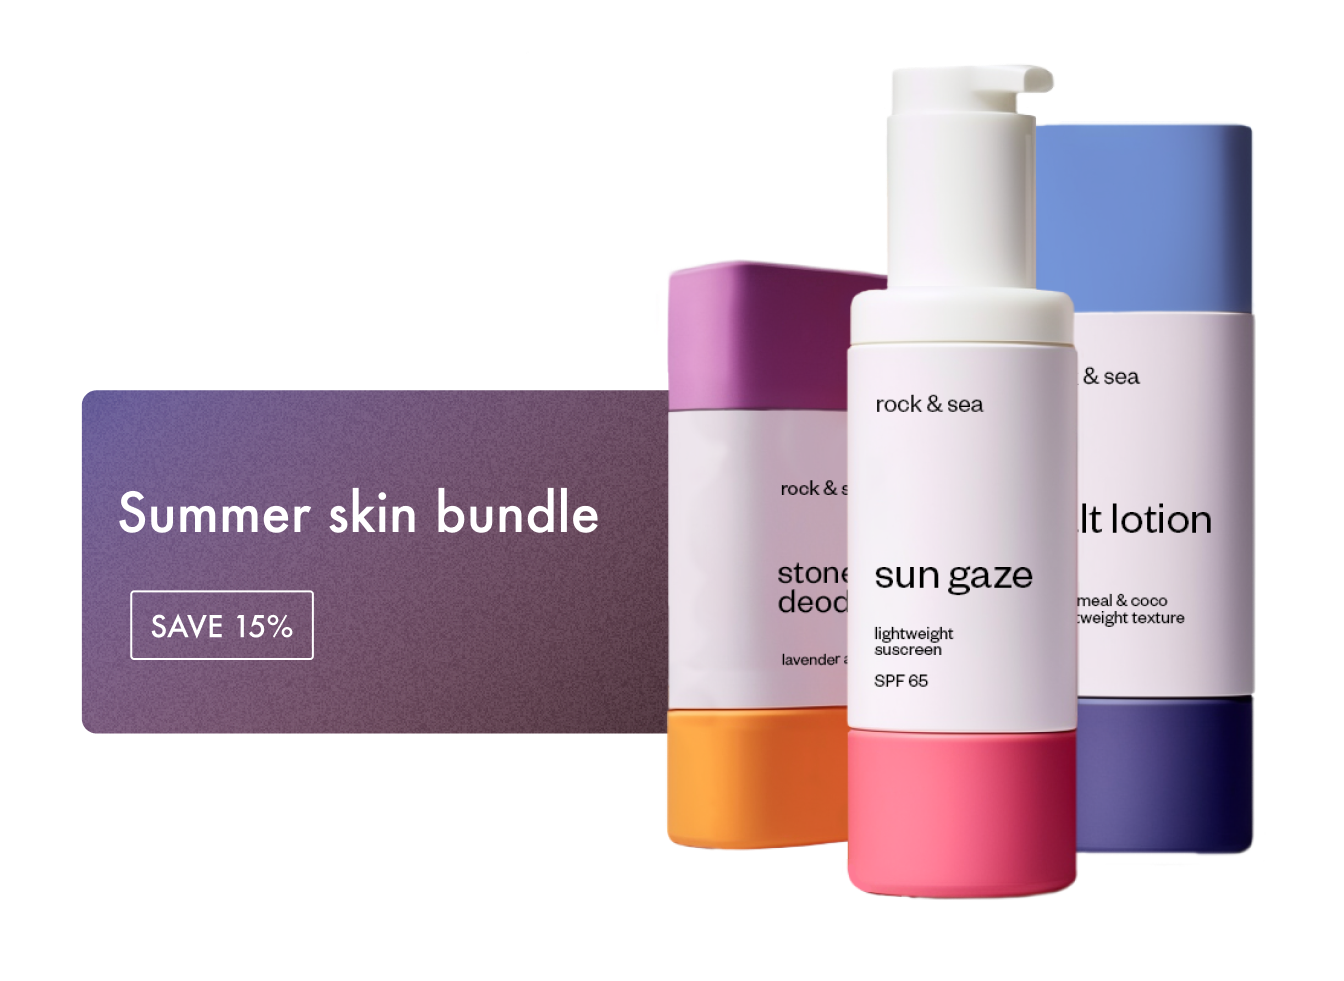 A discount code is provided for a bundle of three products.